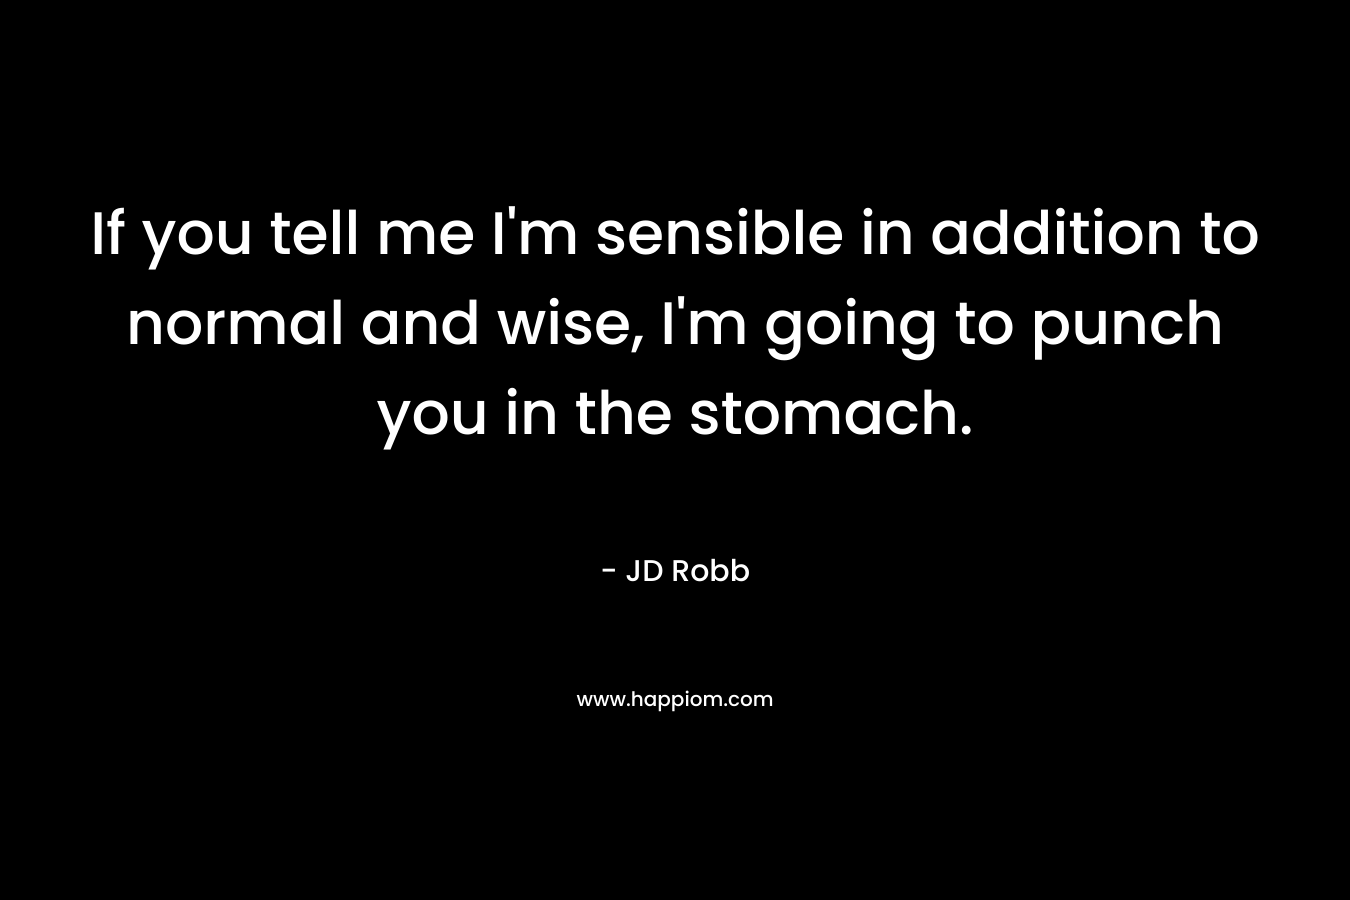 If you tell me I’m sensible in addition to normal and wise, I’m going to punch you in the stomach. – JD Robb